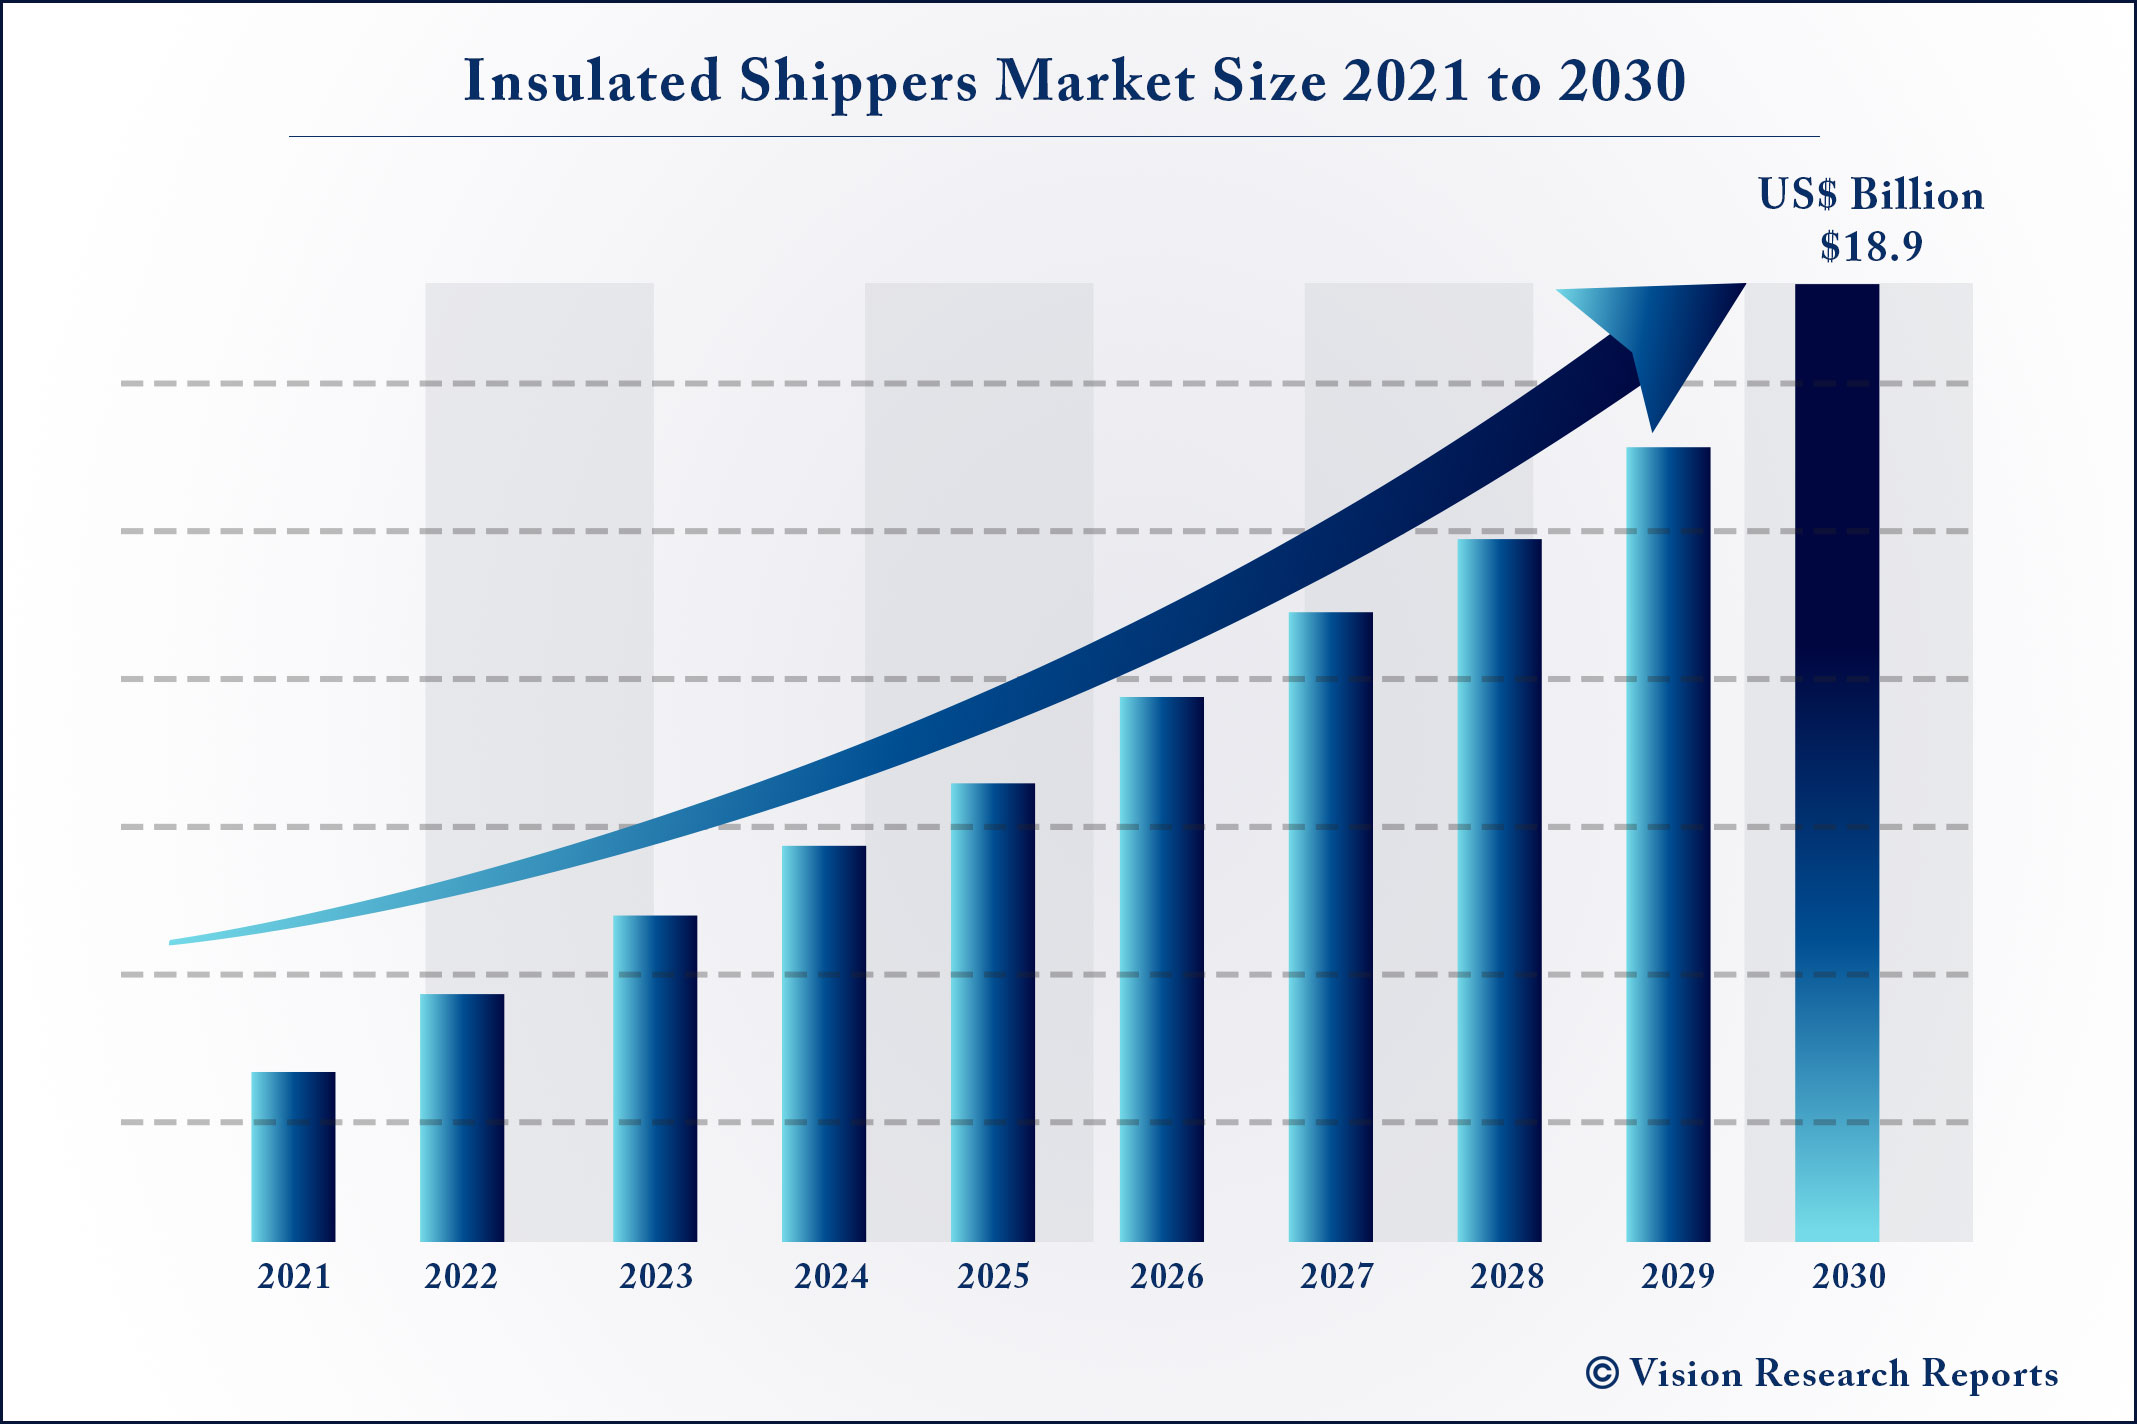 Insulated Shippers Market Size 2021 to 2030